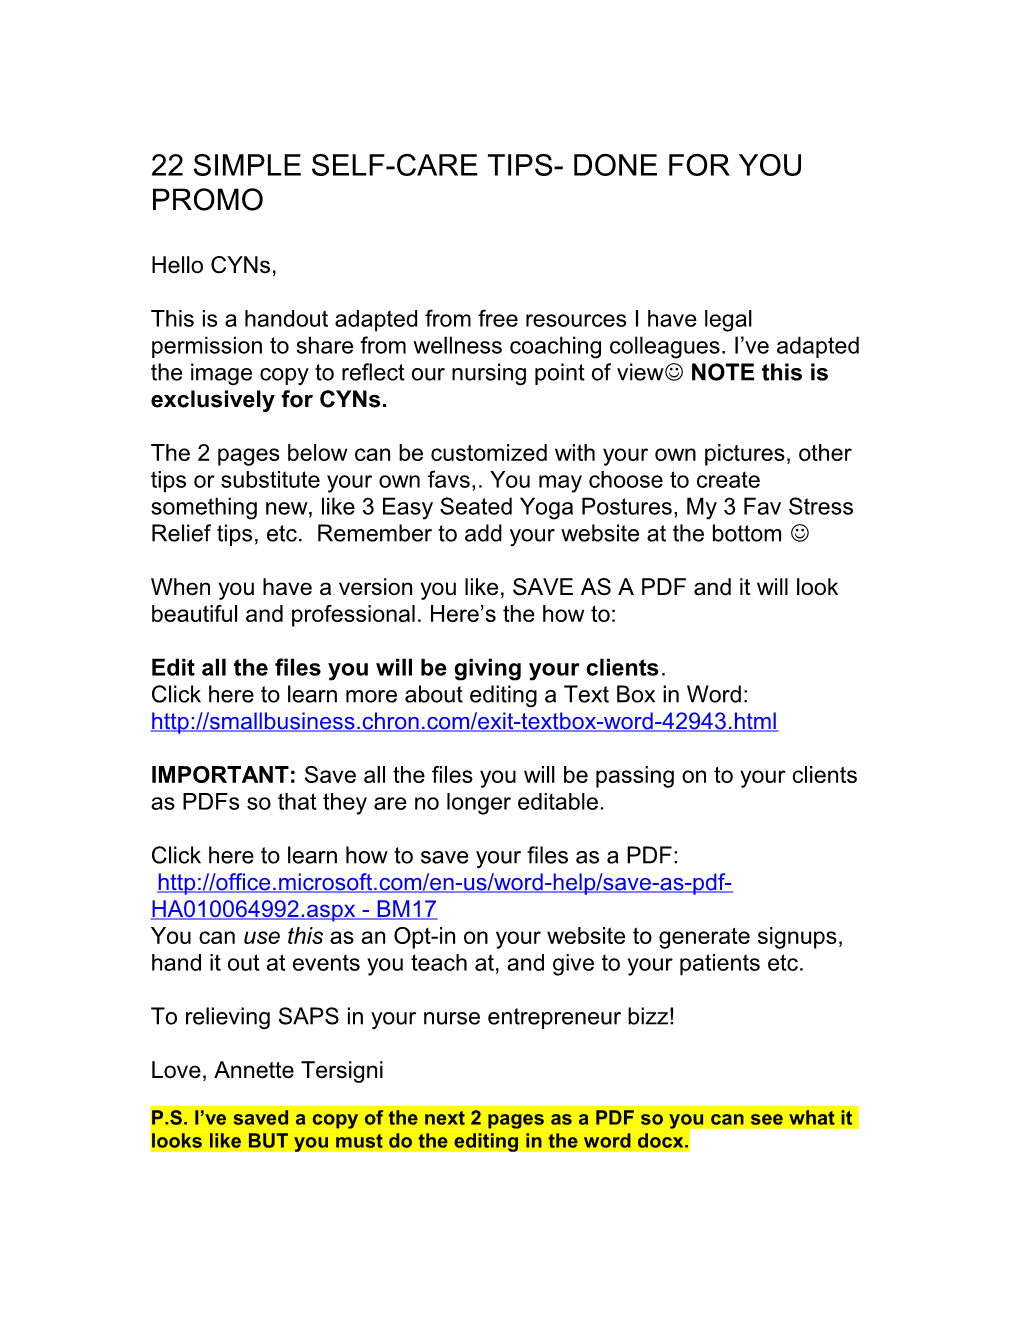 22 Simple Self-Care Tips- Done for You Promo